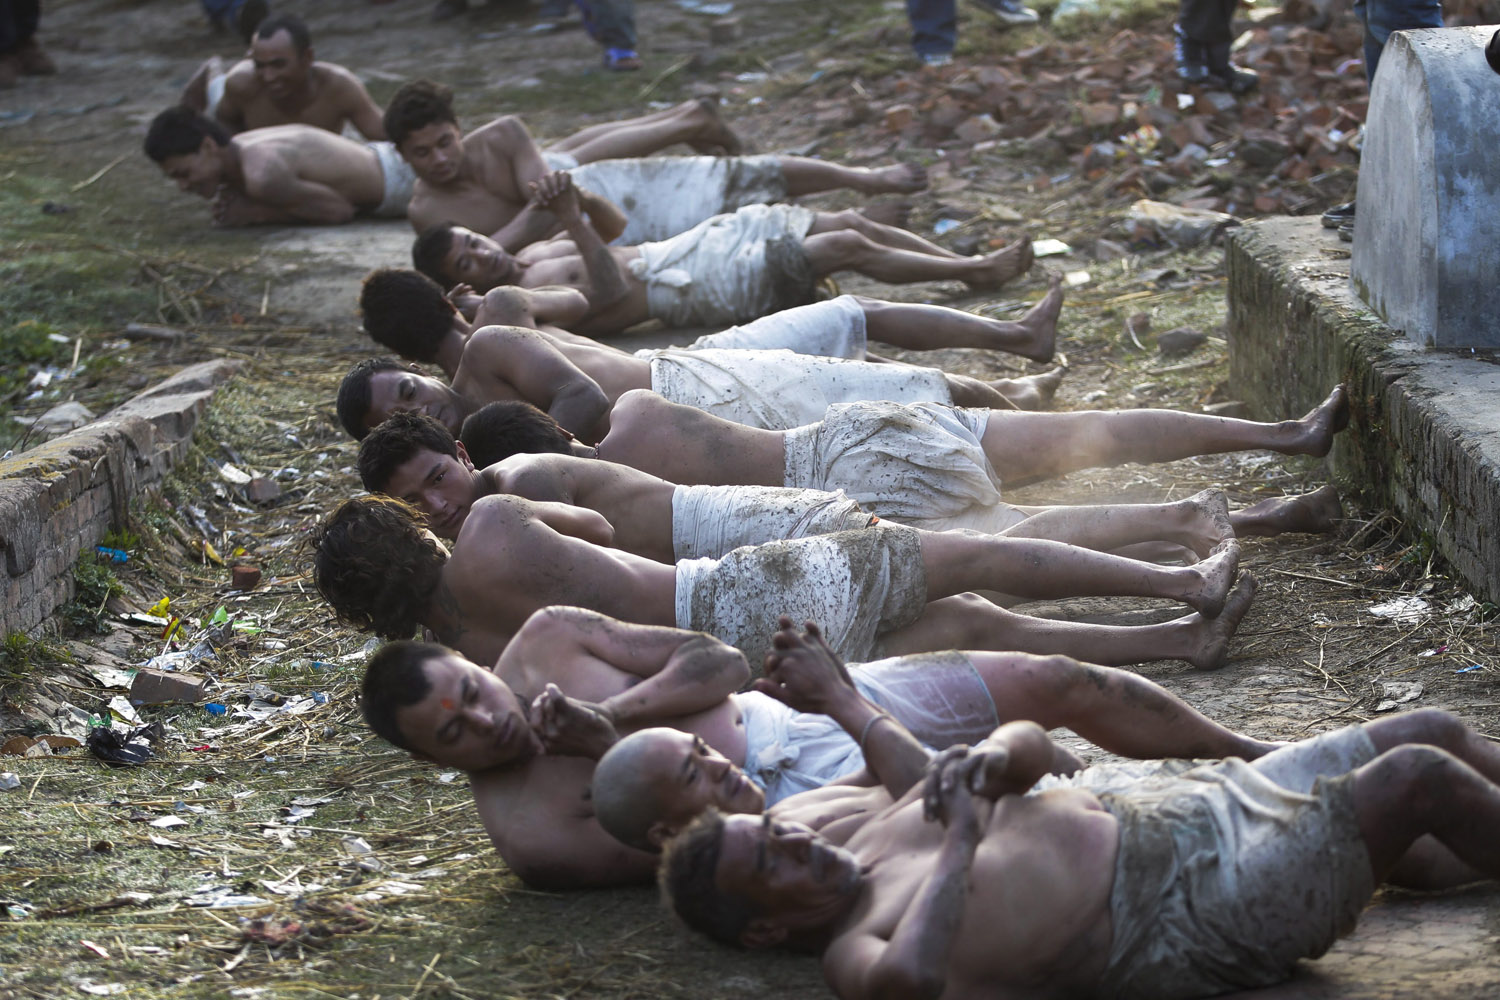 Feb. 25, 2013. Nepalese Hindu devotees roll on the ground before taking a holy bath in the Hanumante river during the last day of the month long Madhav Narayan festival, in Bhaktapur, Nepal.